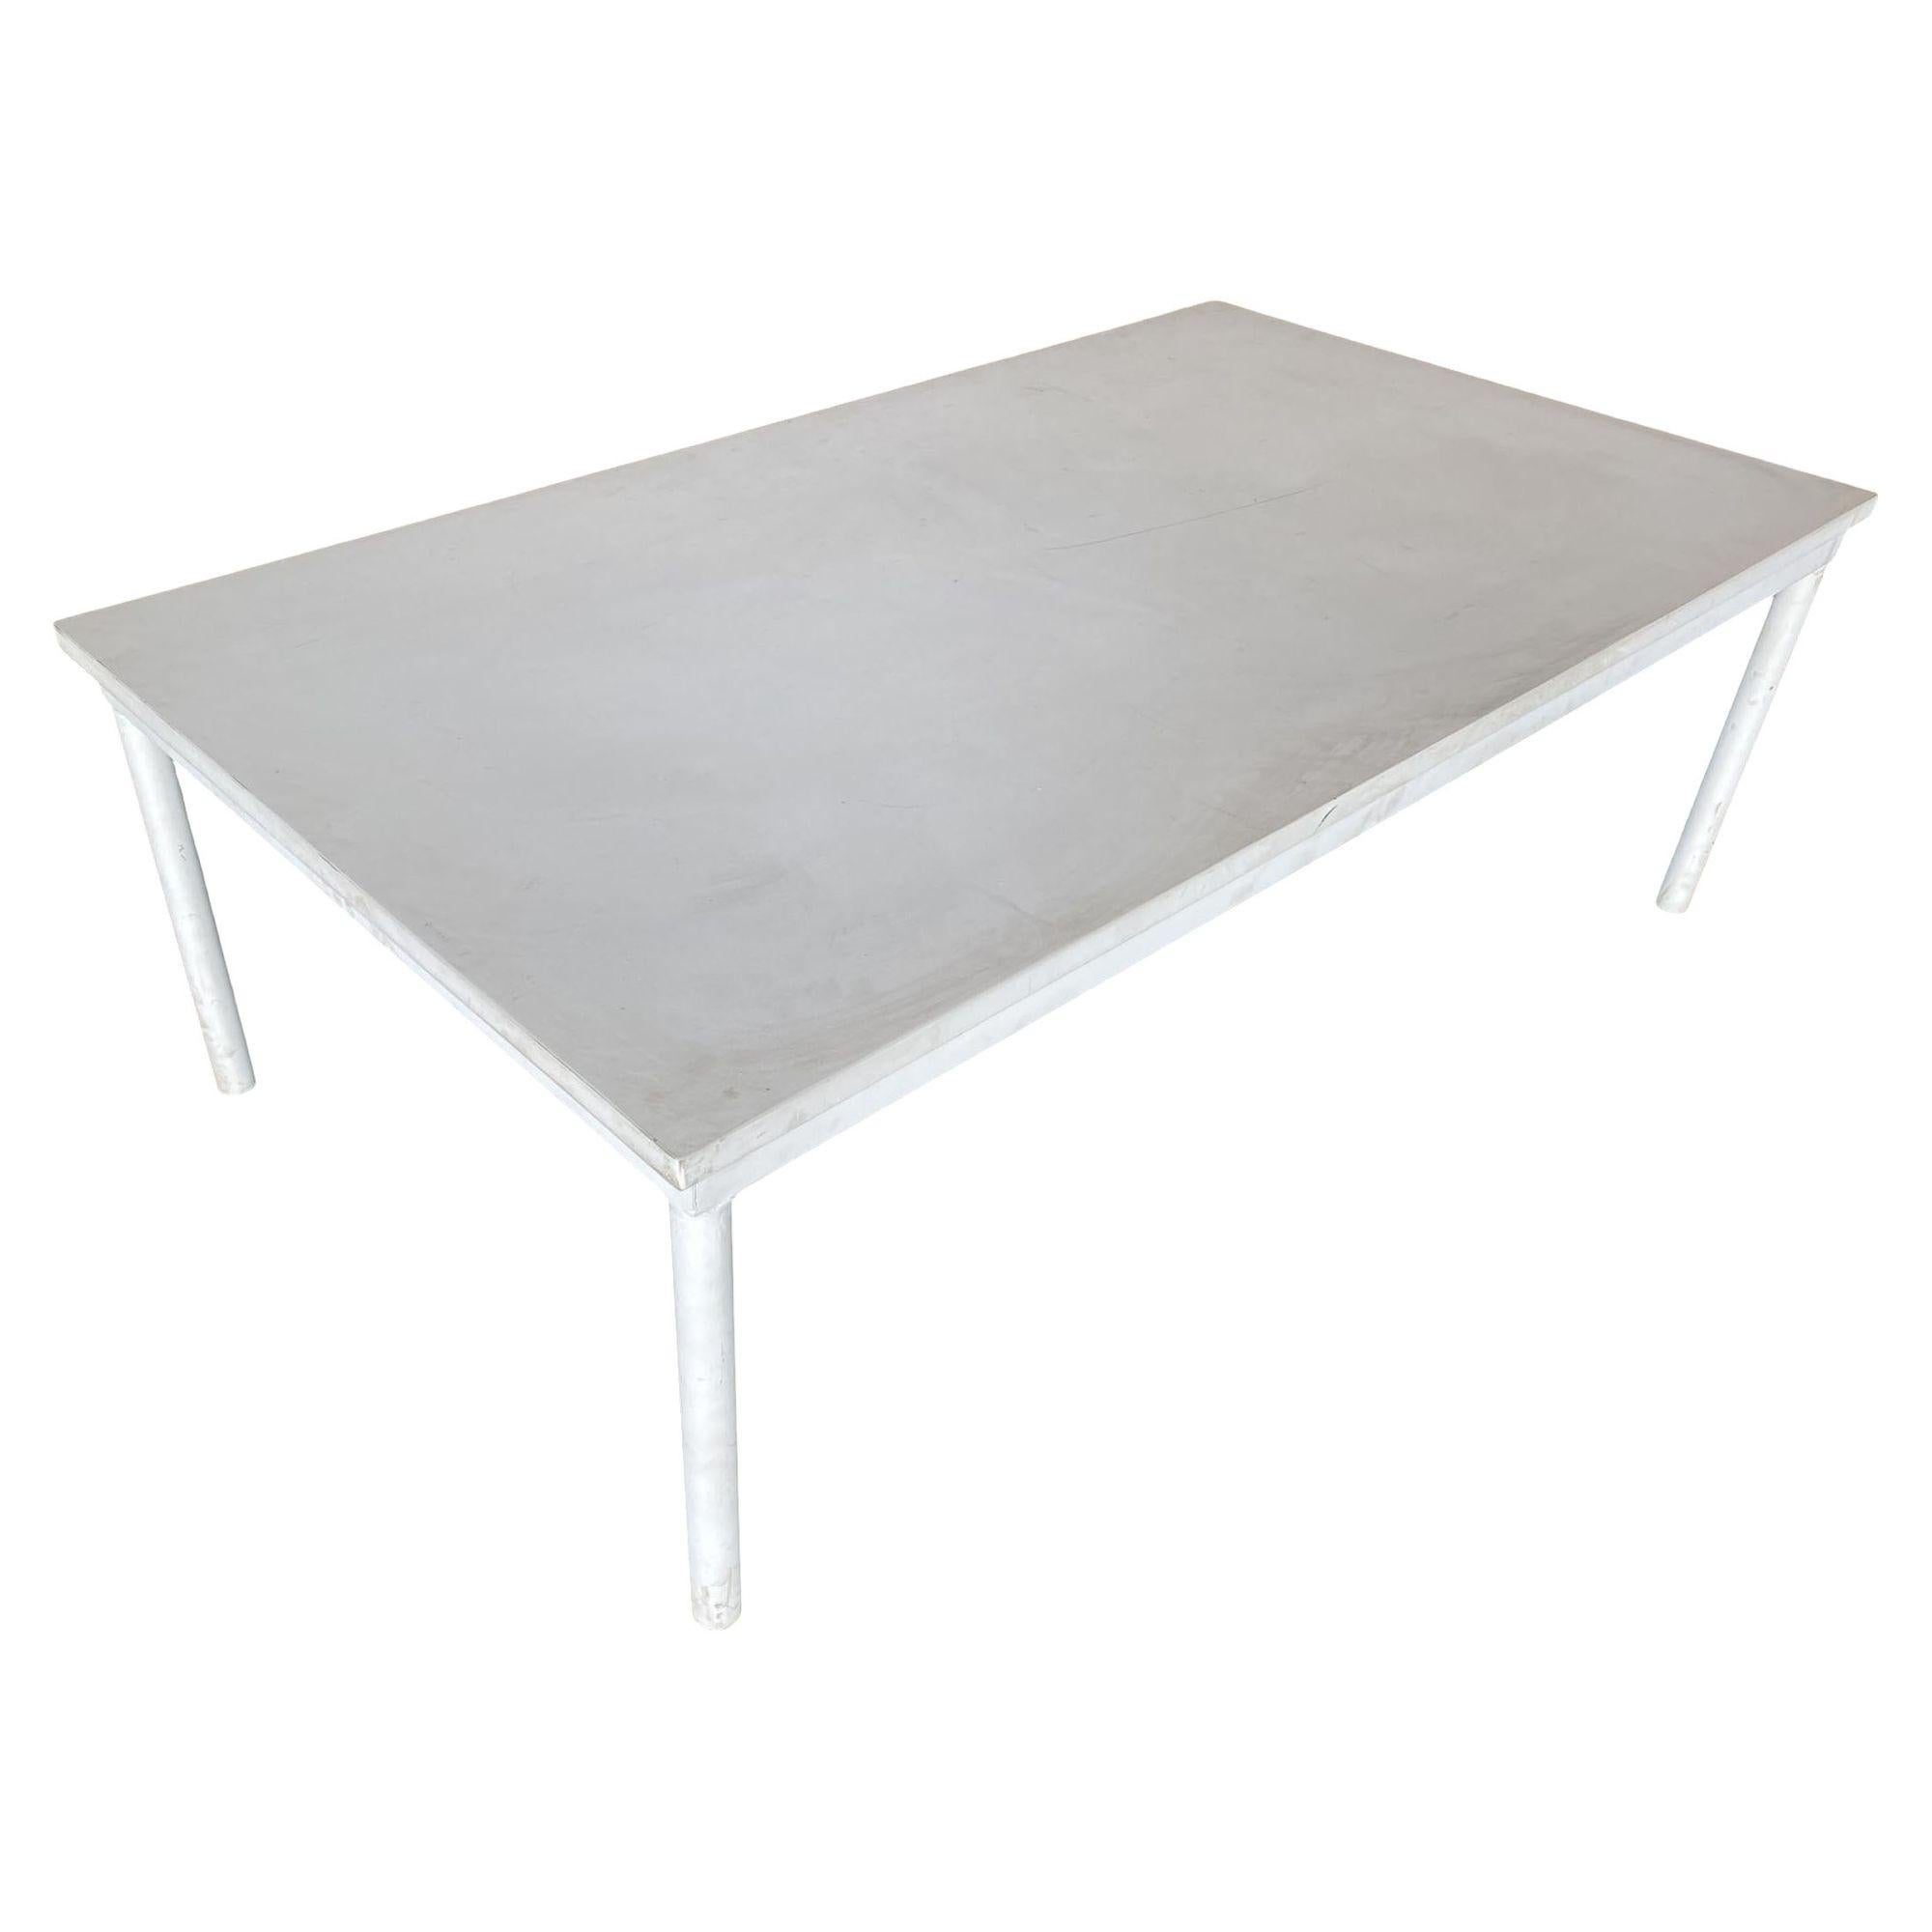 Large custom made modernist mod coffee table featuring a large MDF top and welded tubular steel frame. Measure: 50